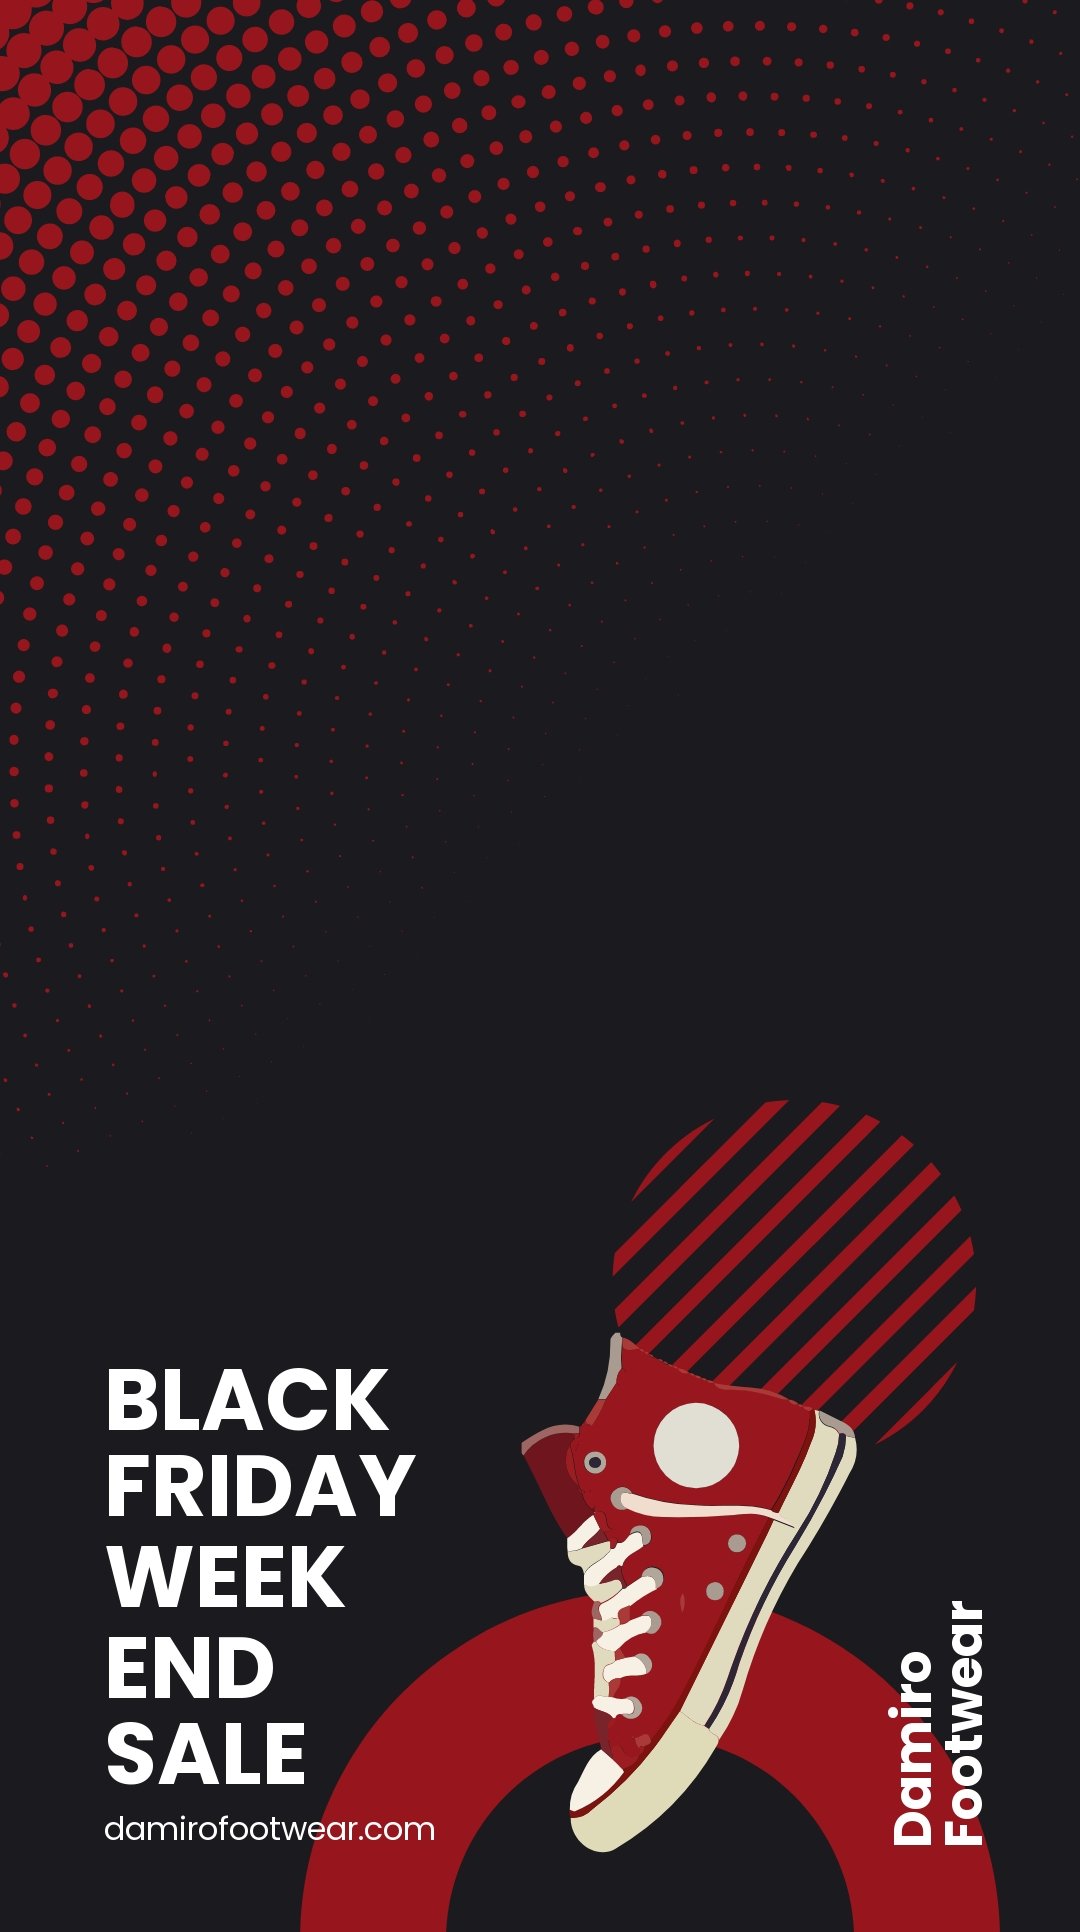 Black Friday Weekend Sale Snapchat Geofilter Template